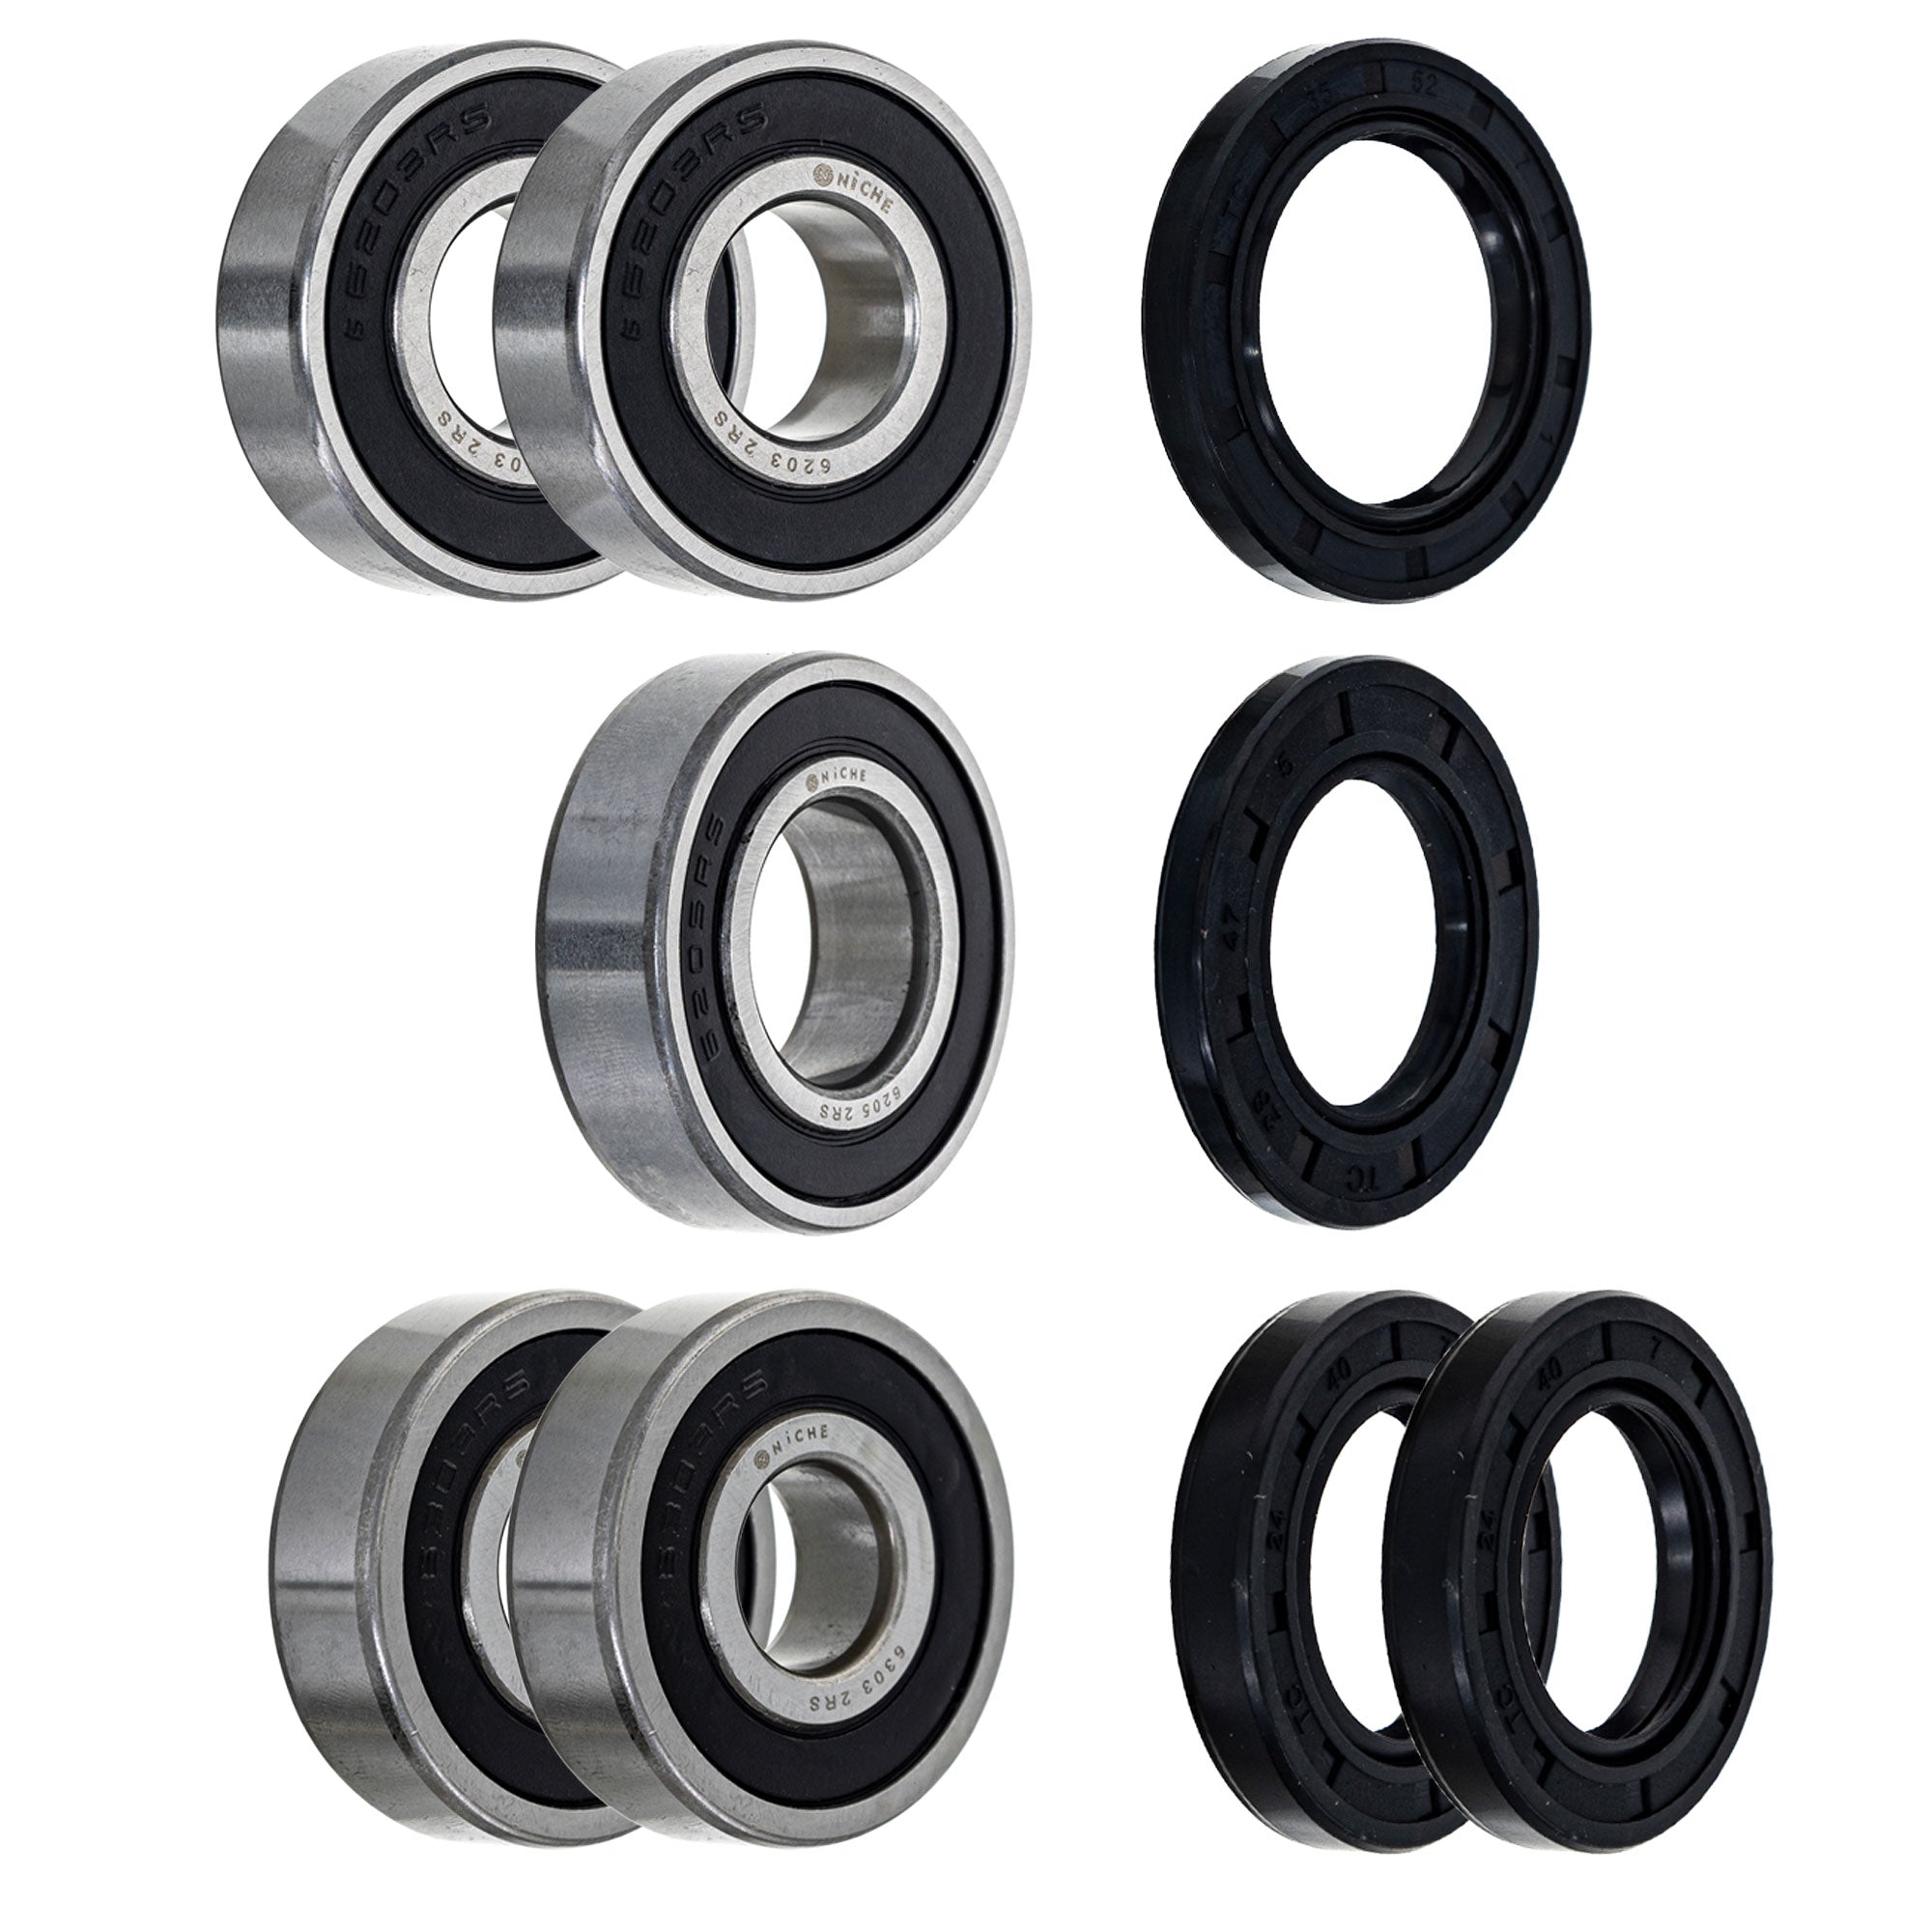 Wheel Bearing Seal Kit for zOTHER Ref No W650 NICHE MK1008546